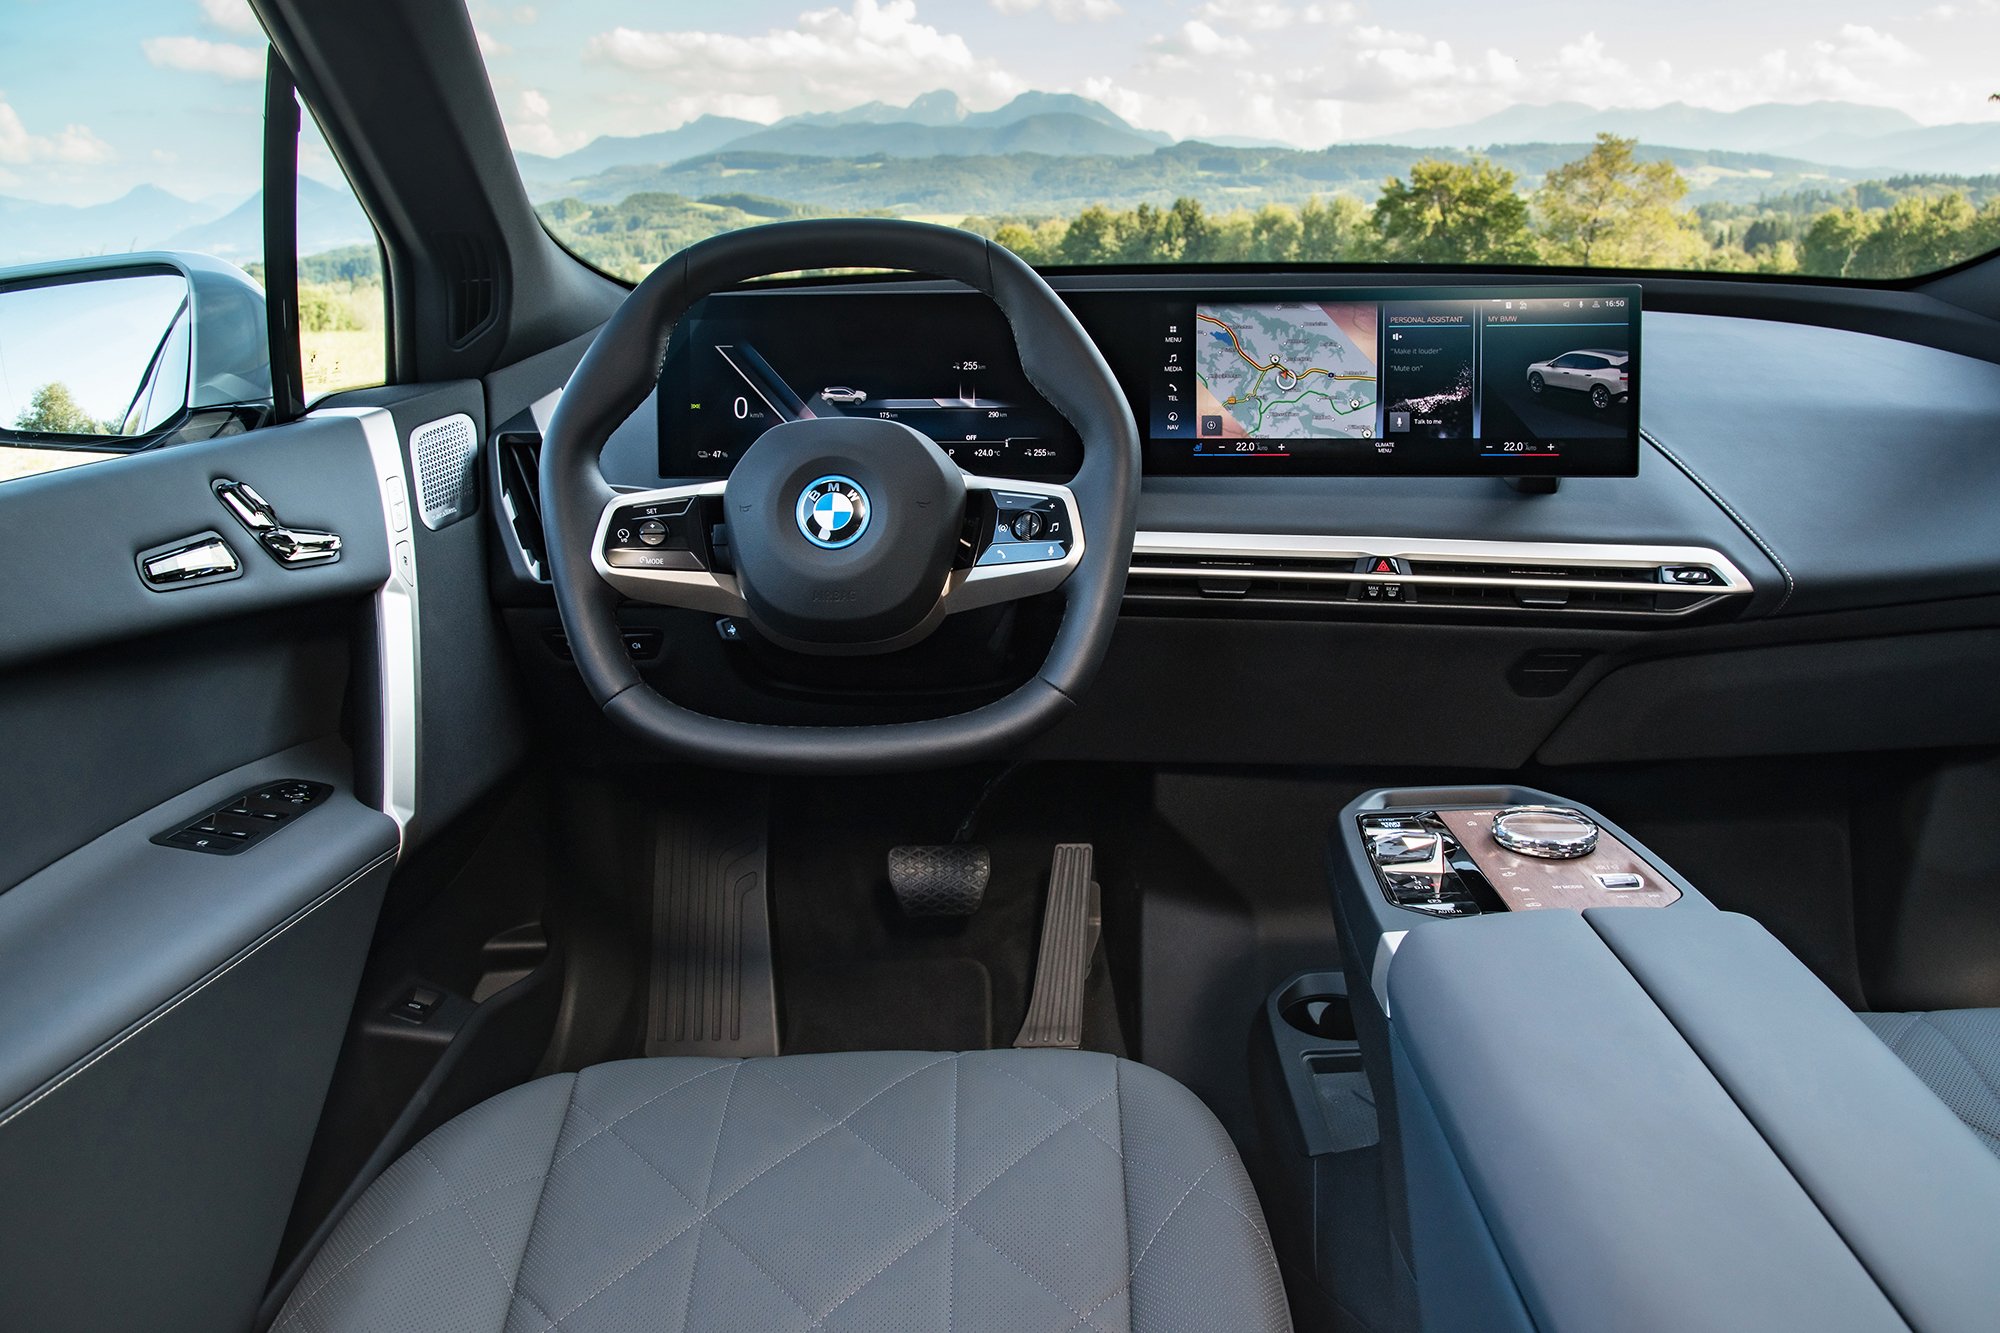 The interior of the new BMW iX xDrive50